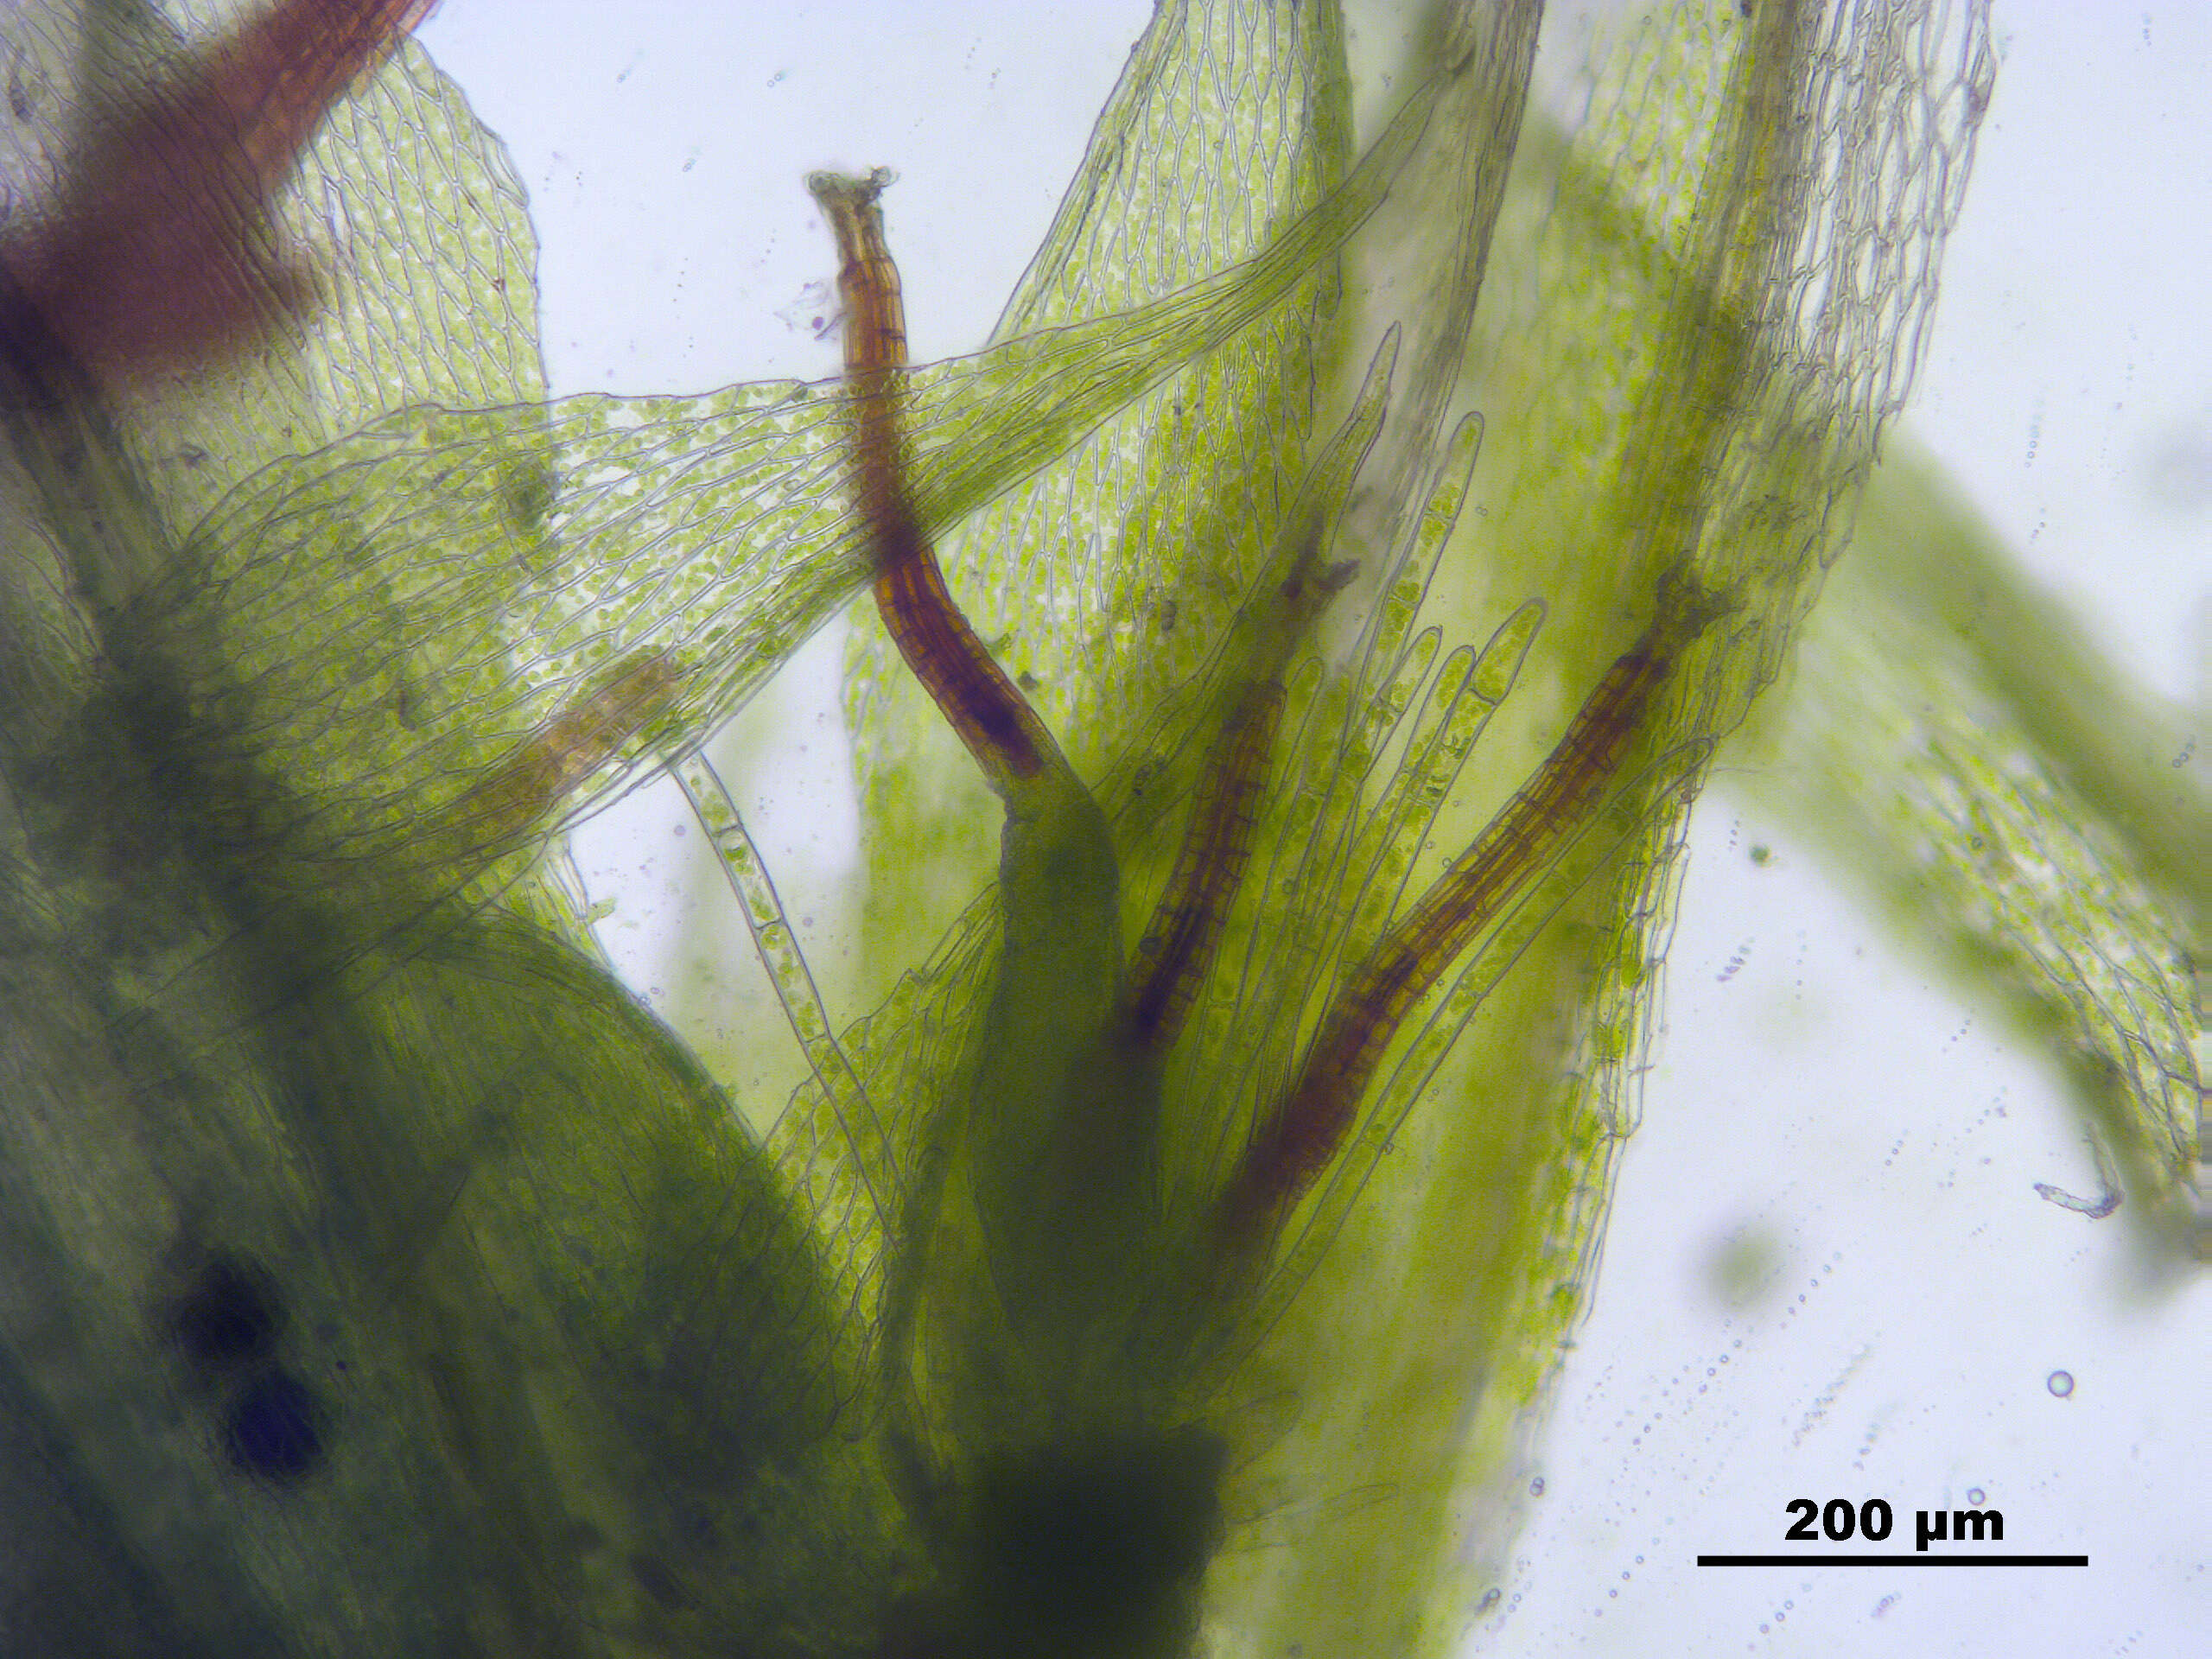 Image of dry calcareous bryum moss